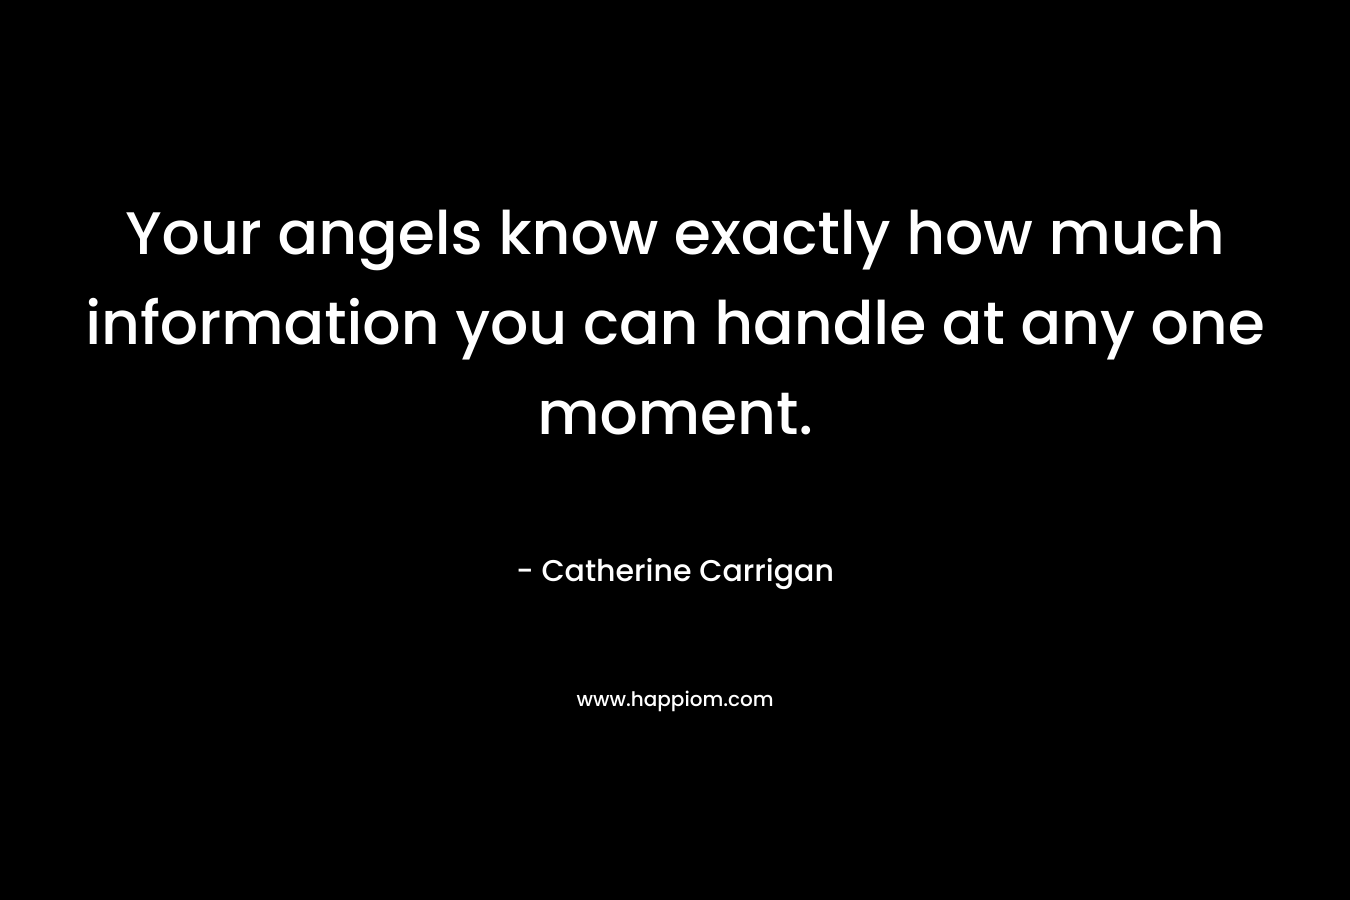 Your angels know exactly how much information you can handle at any one moment. – Catherine Carrigan